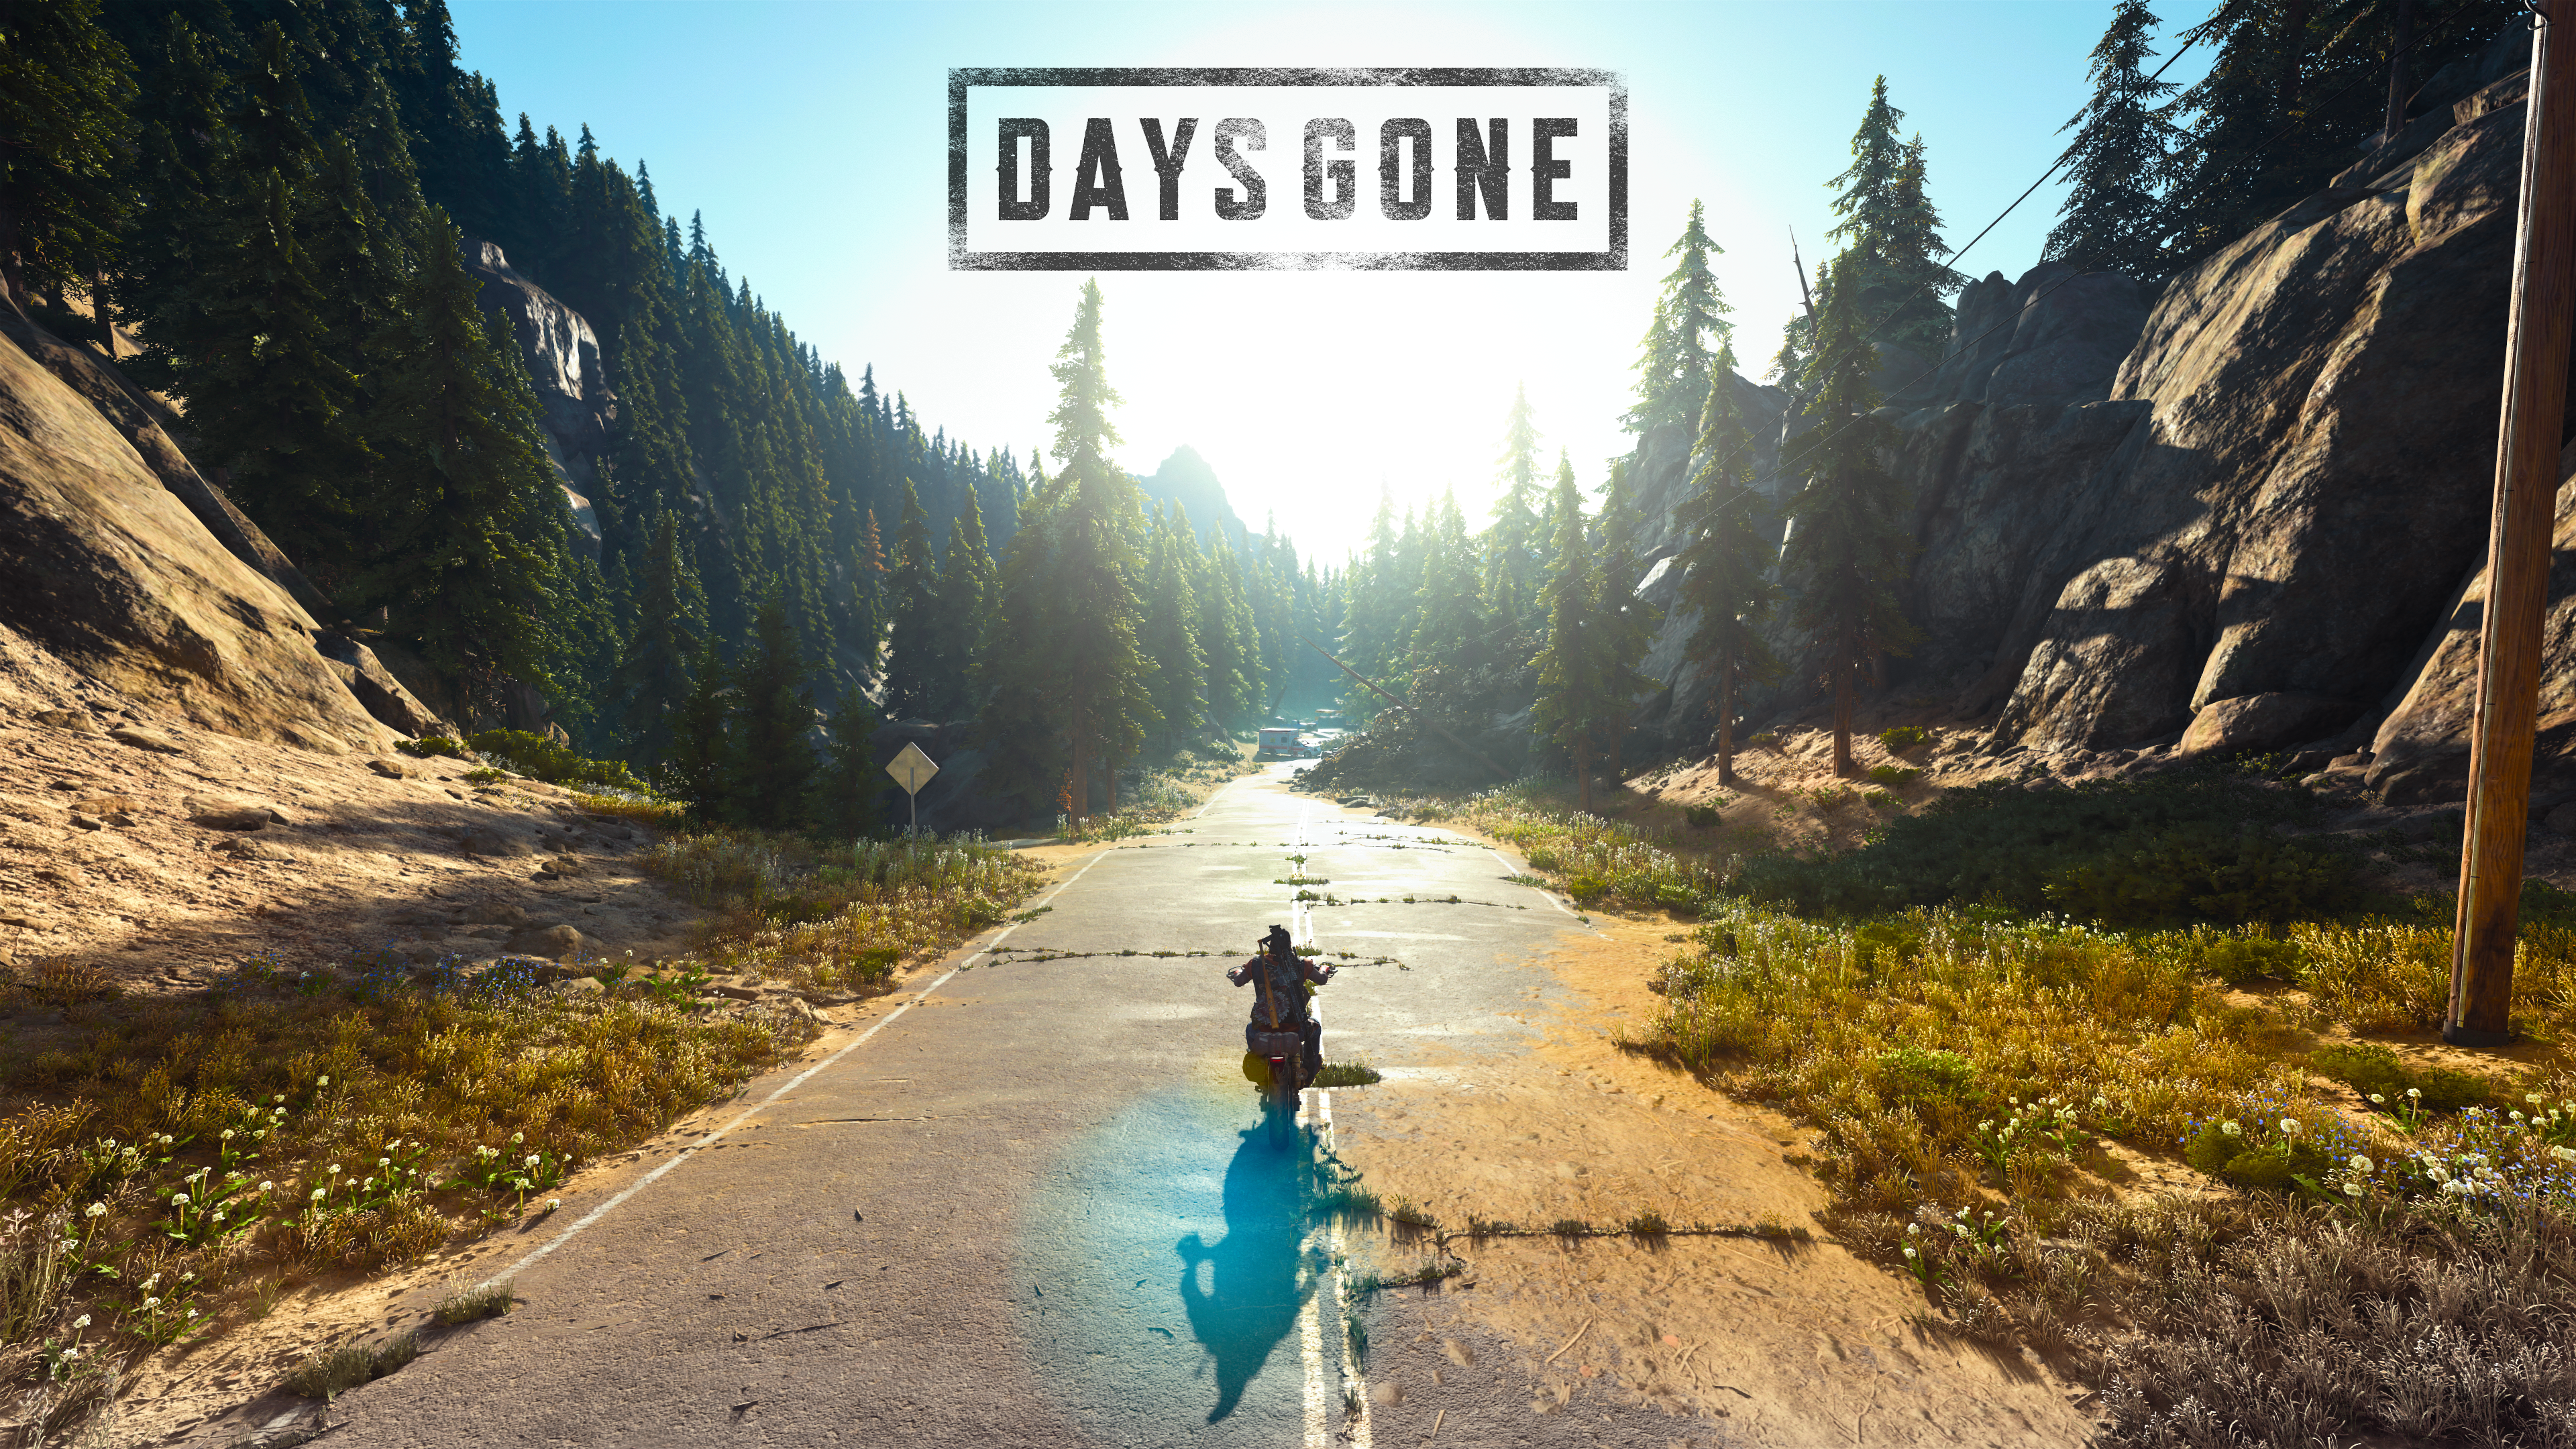 More Days Gone photo mode shots. : r/MobileWallpaper